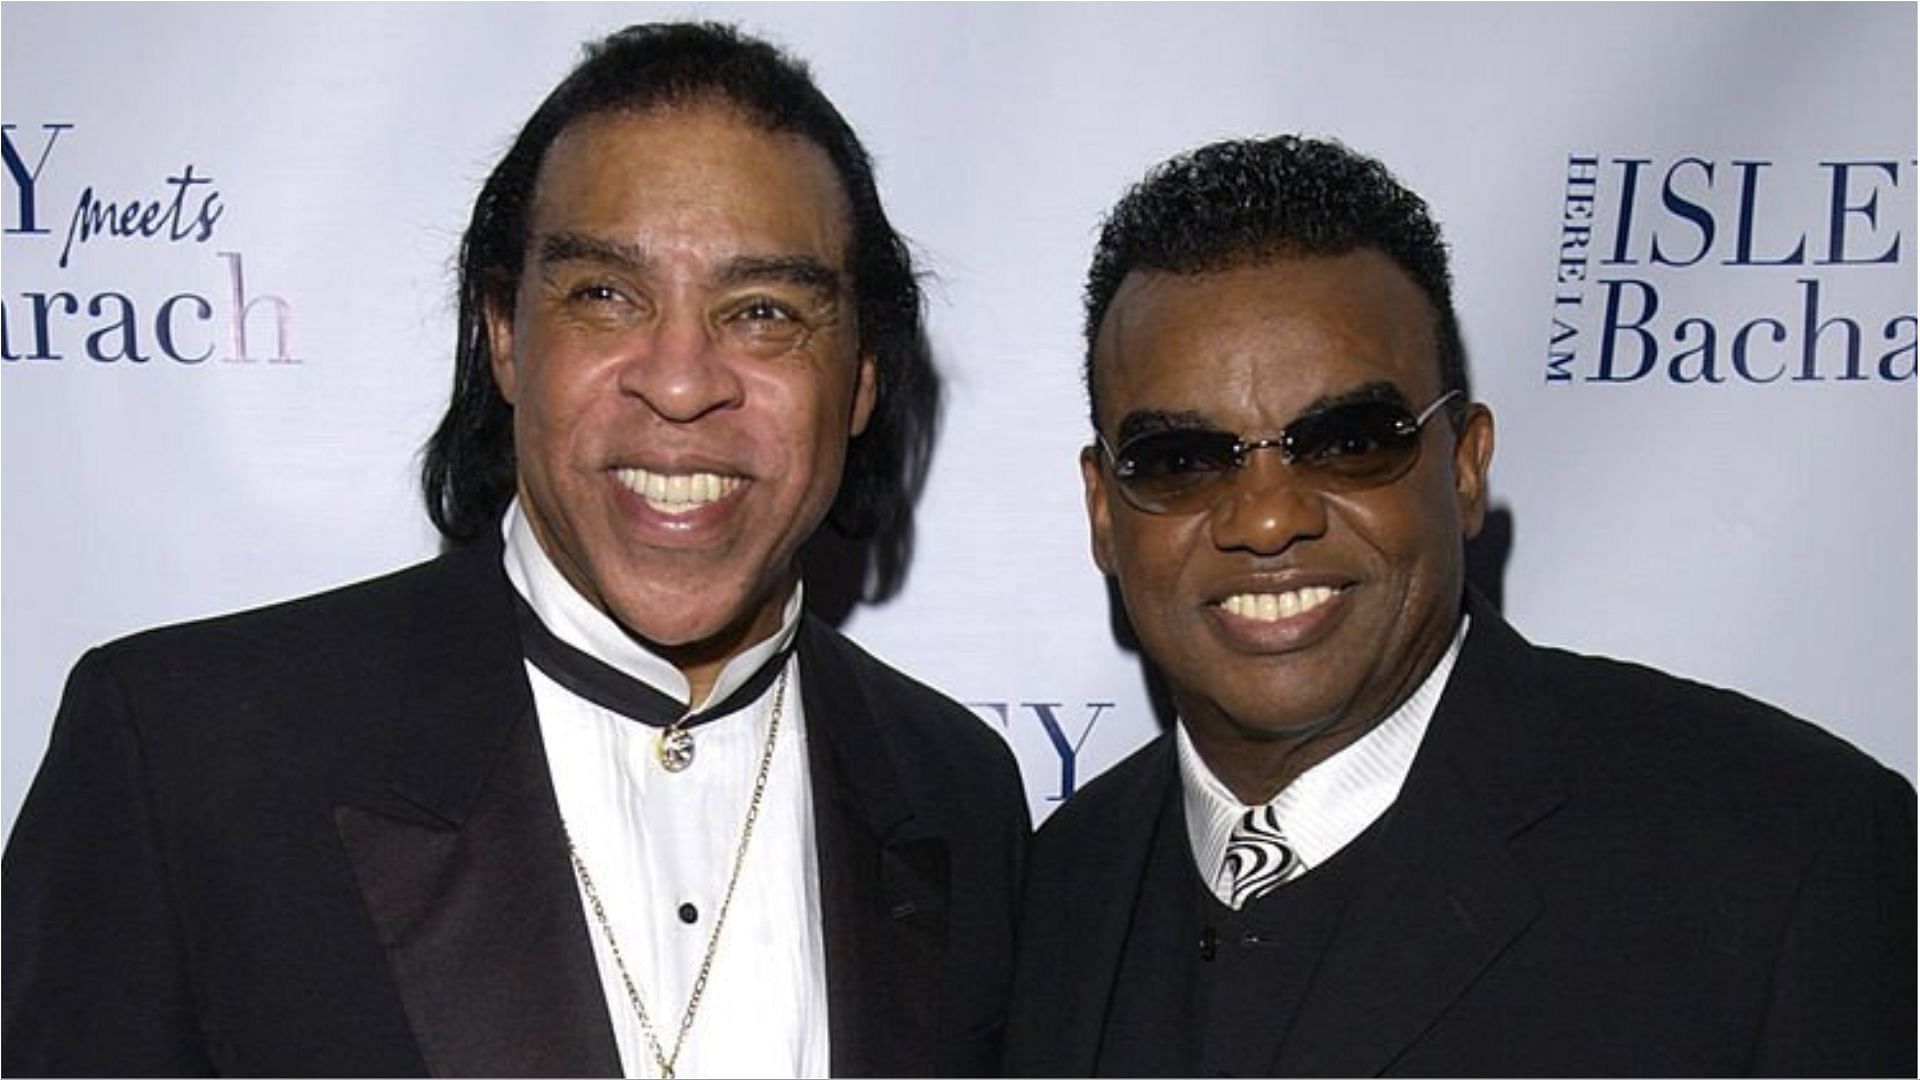 Rudolph Isley has recently filed a lawsuit against Ronald Isley (Image via RJ Capak/Getty Images)